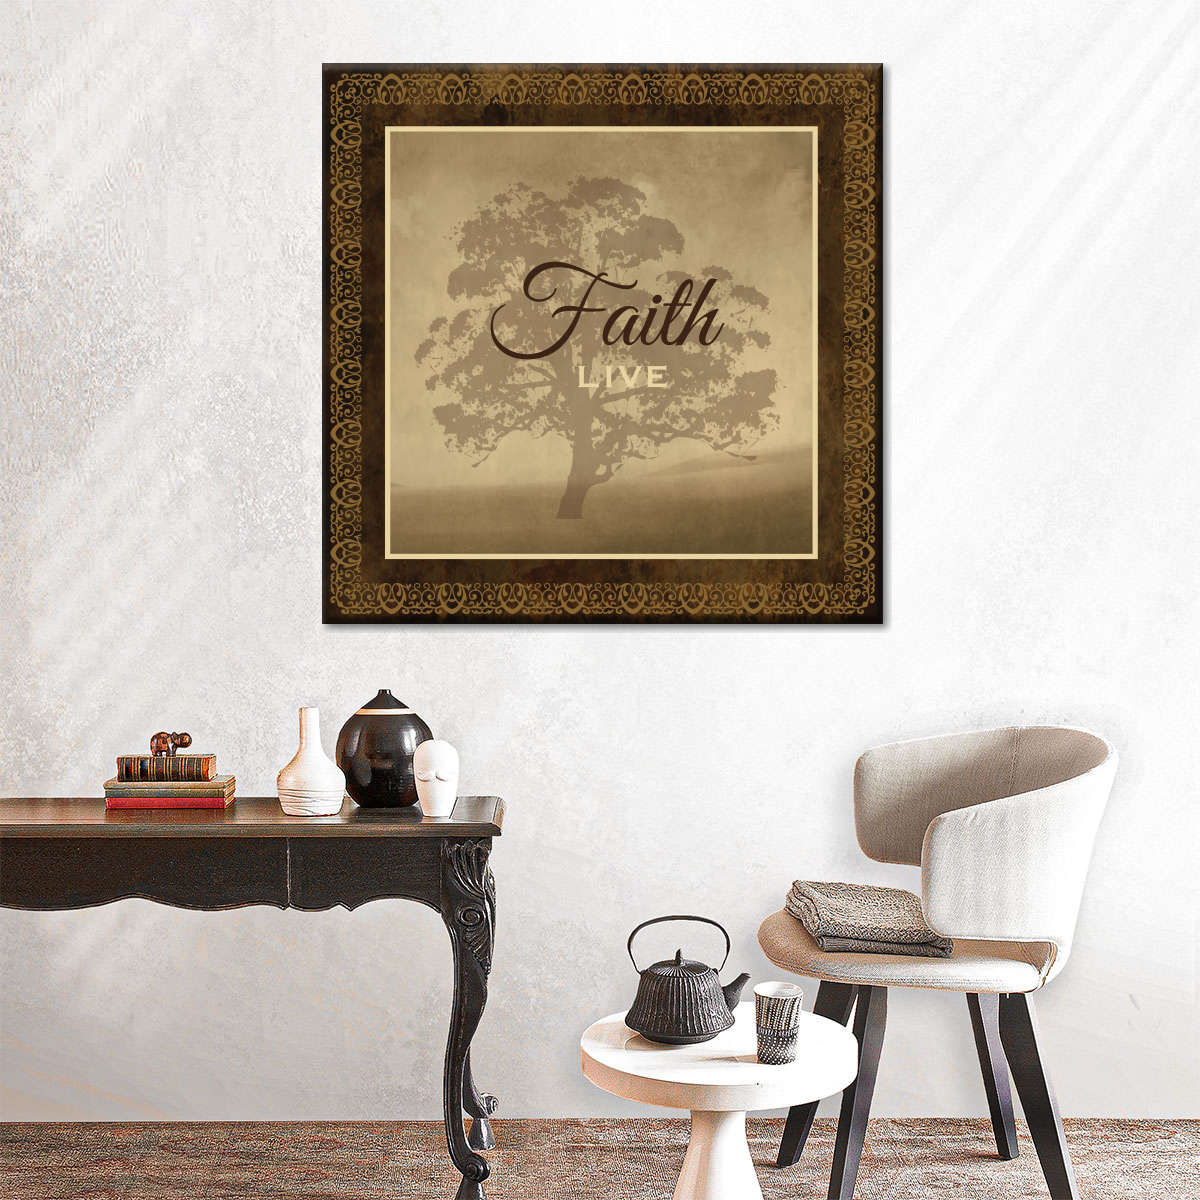 Faith Live Square Canvas Wall Art - Bible Verse Wall Art Canvas - Religious Wall Hanging